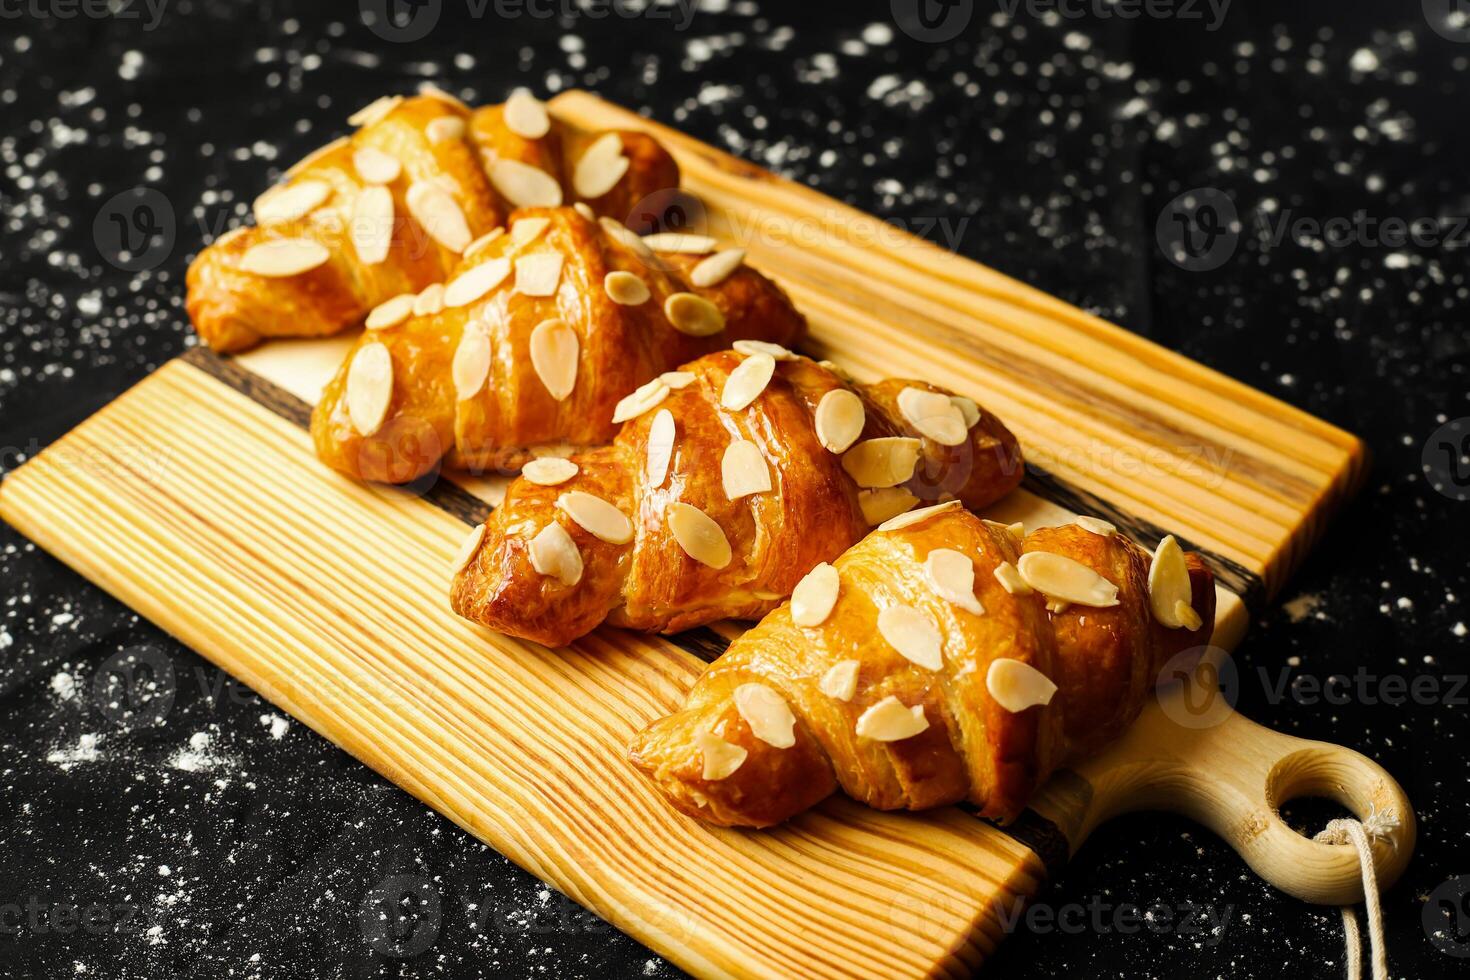 Almond Croissant topping with nuts served on wooden board side view of french breakfast baked food item photo